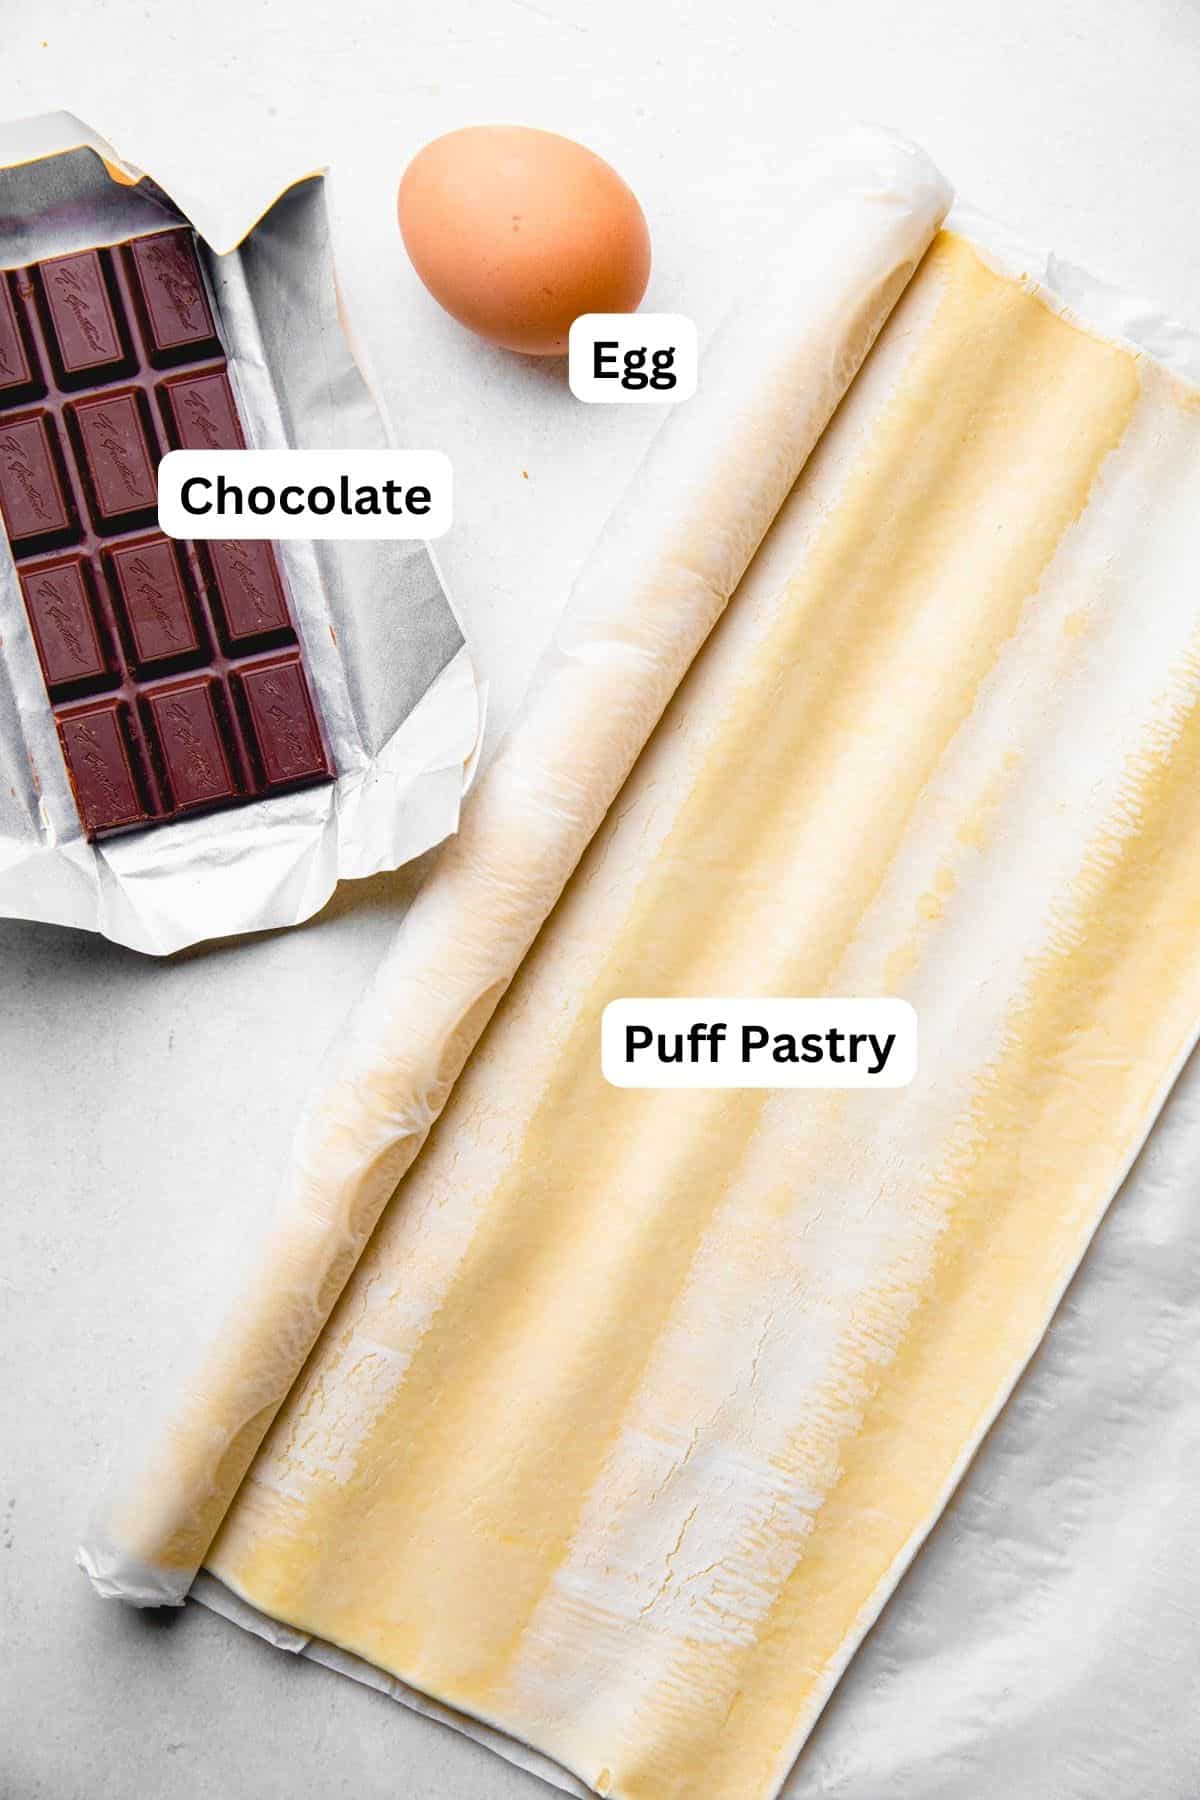 Puff pastry, baking chocolate, and an egg.